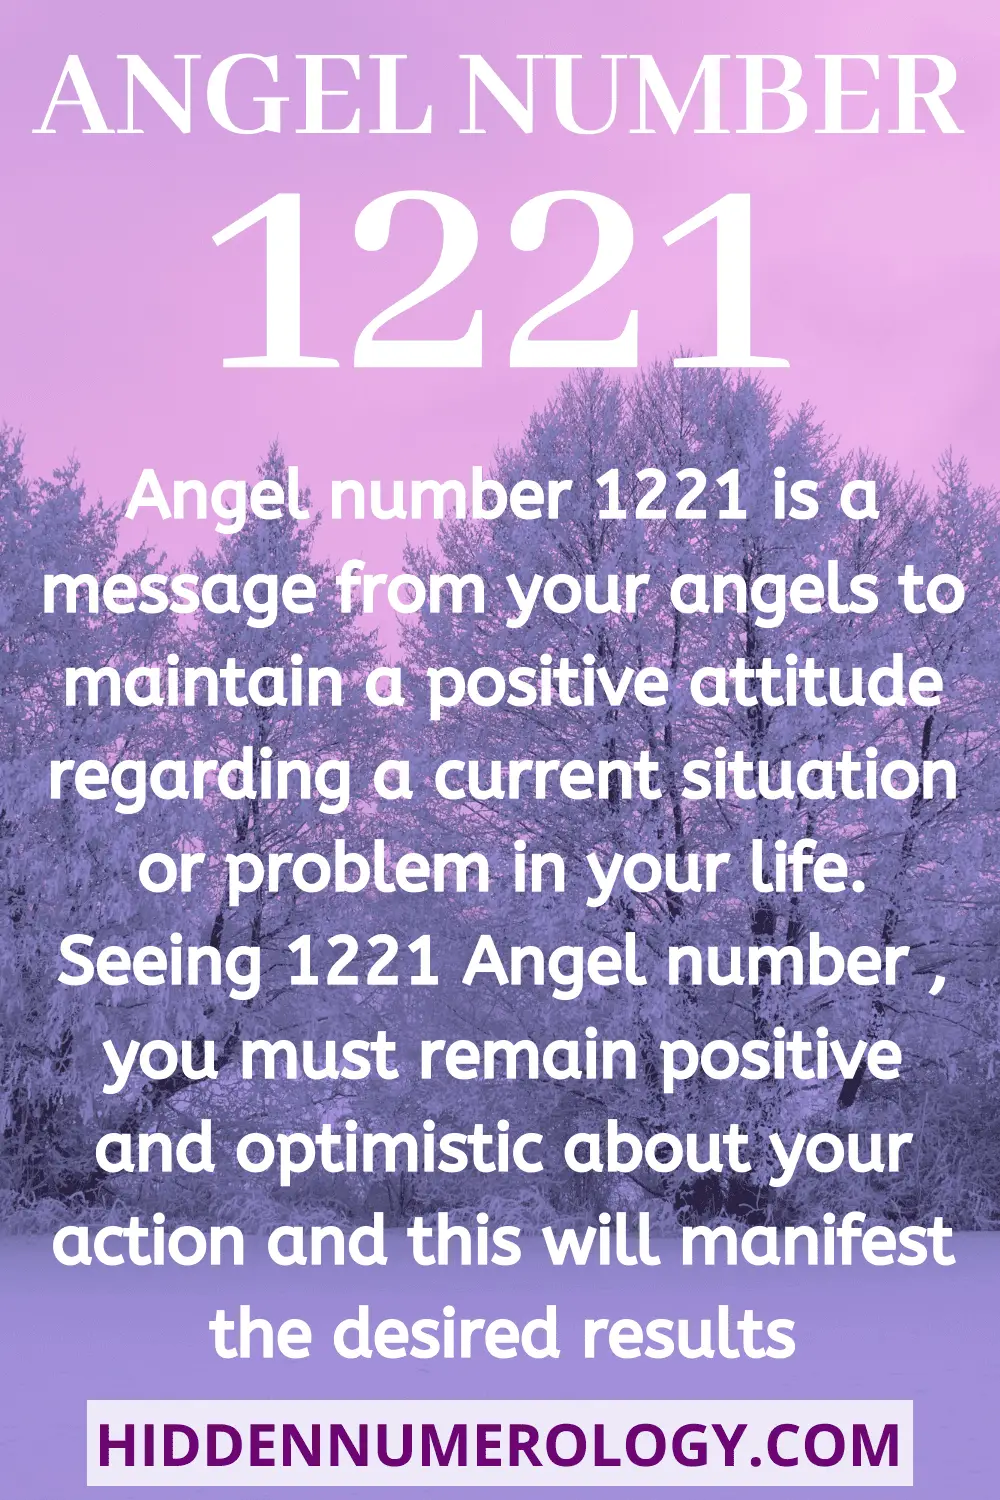 What Is The Meaning Of 1221?